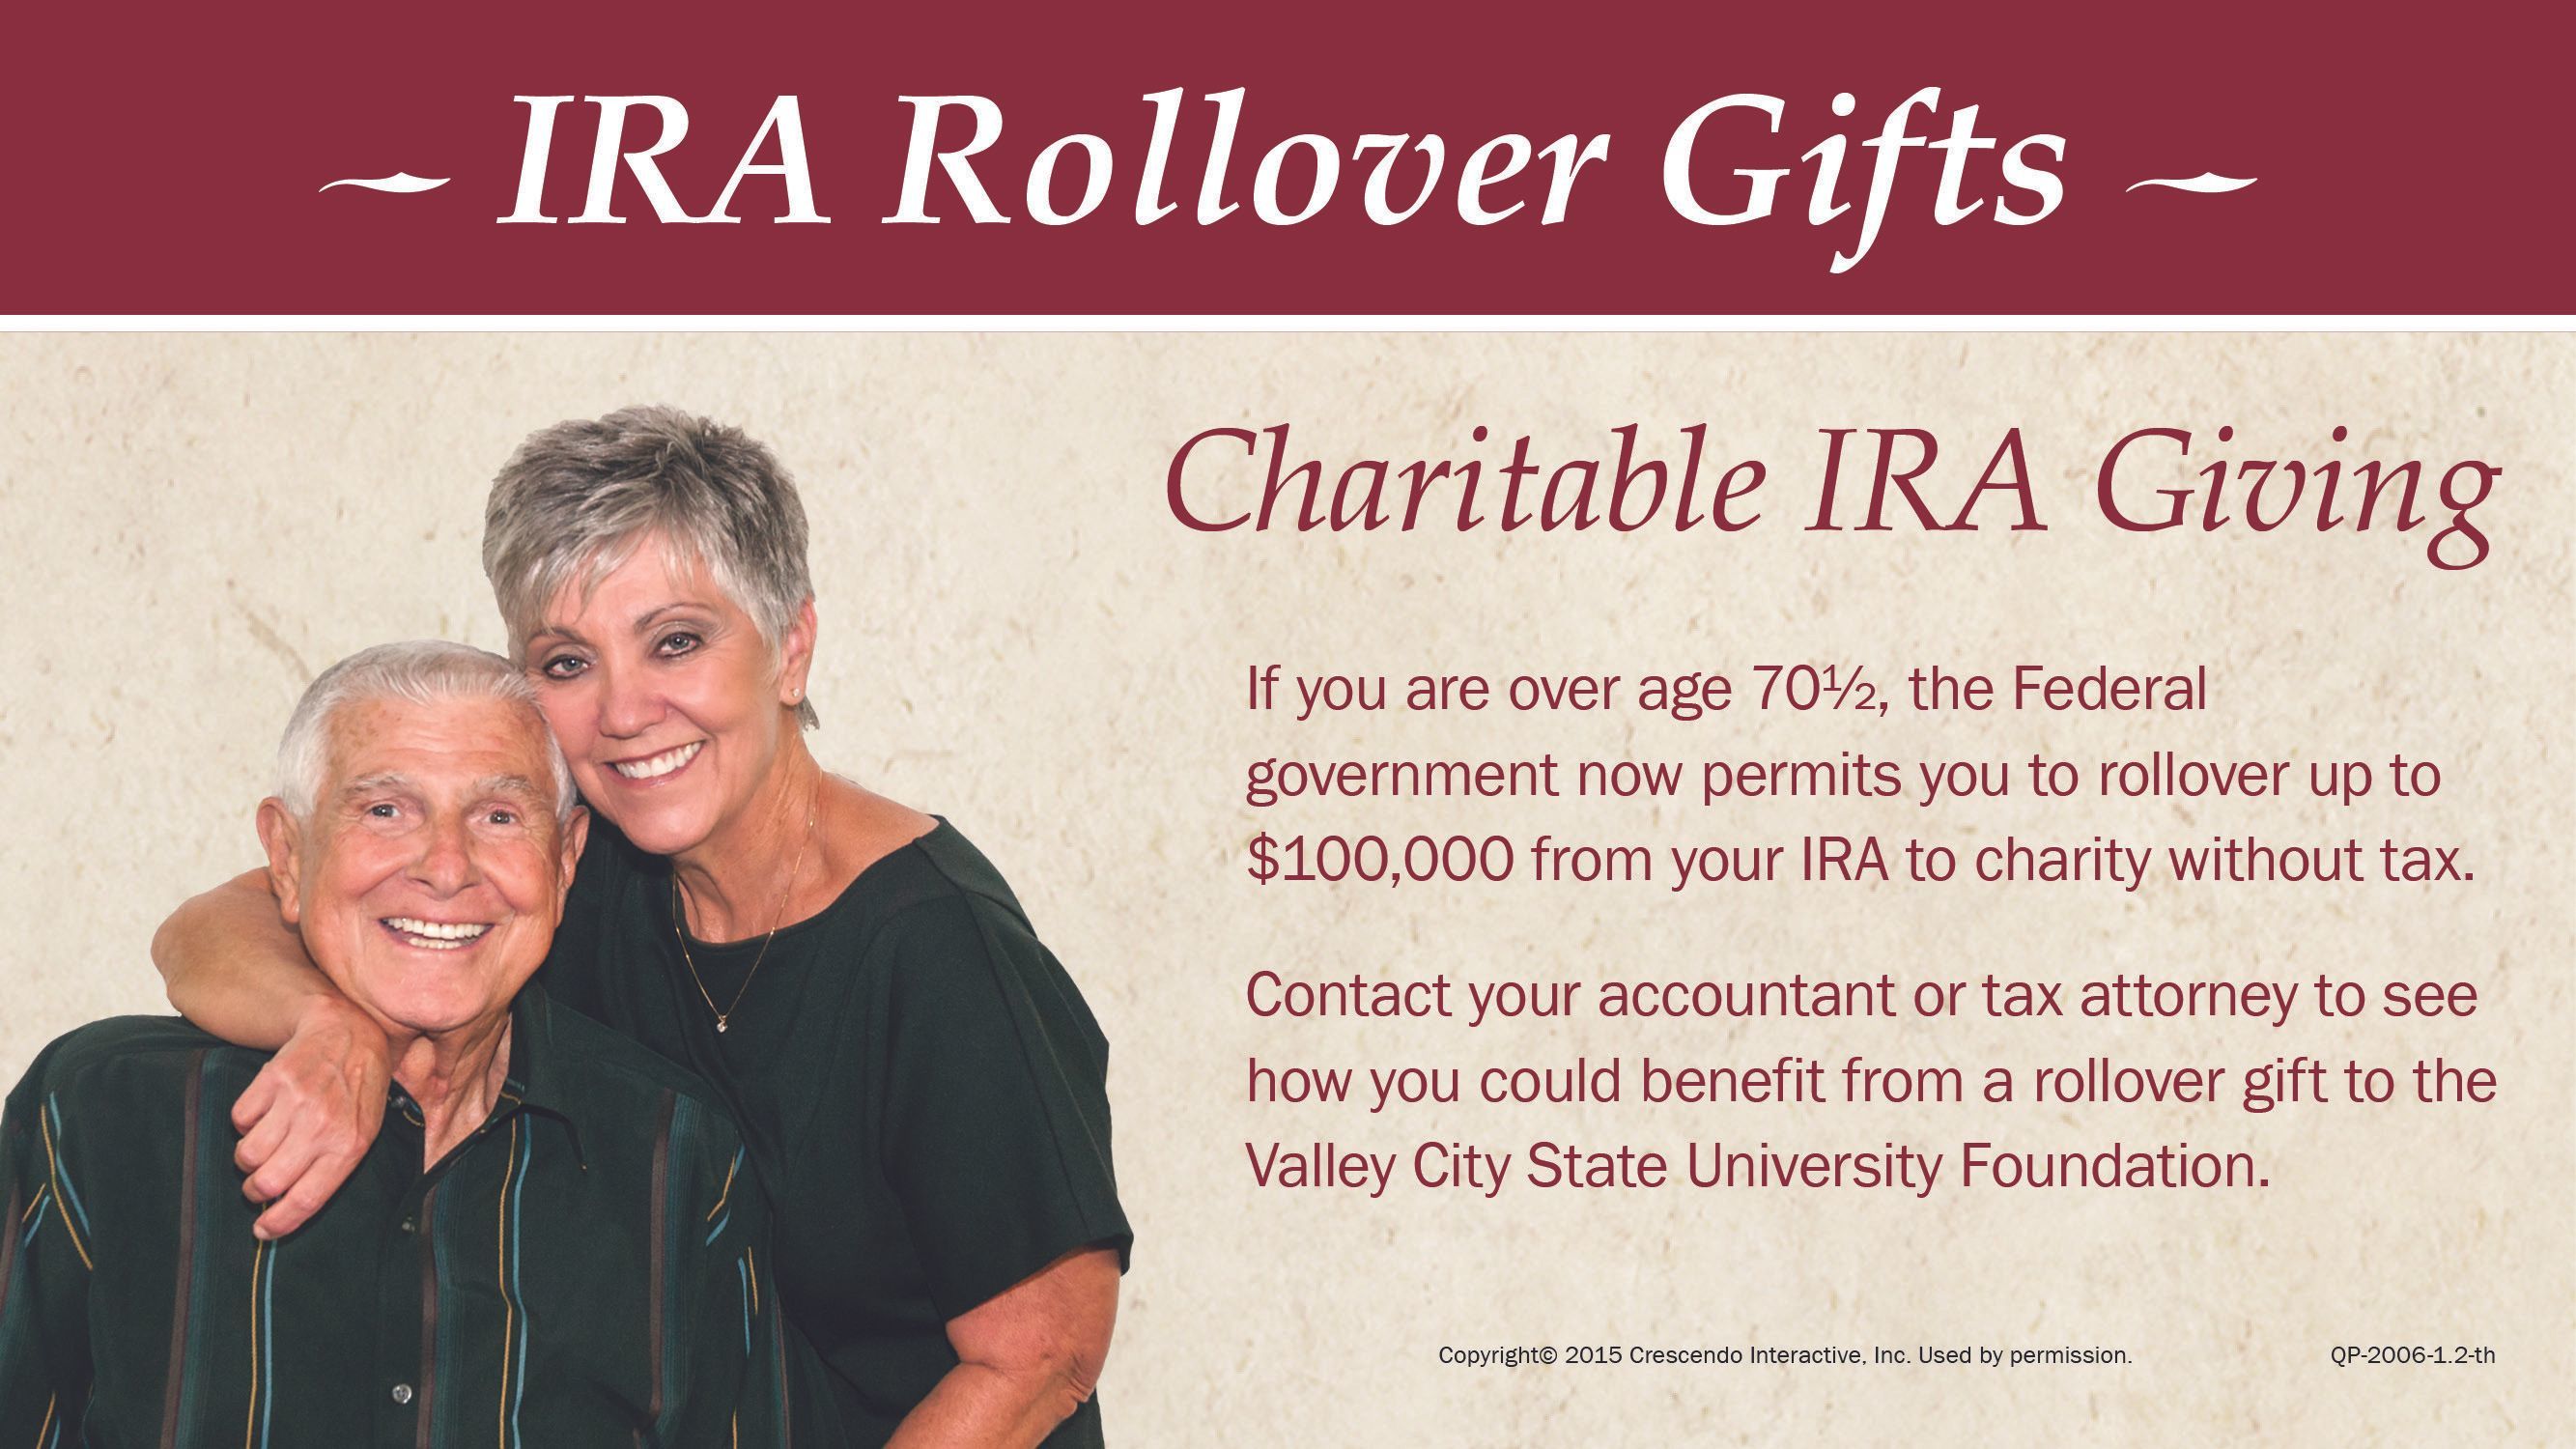 IRA Rollover Gifts